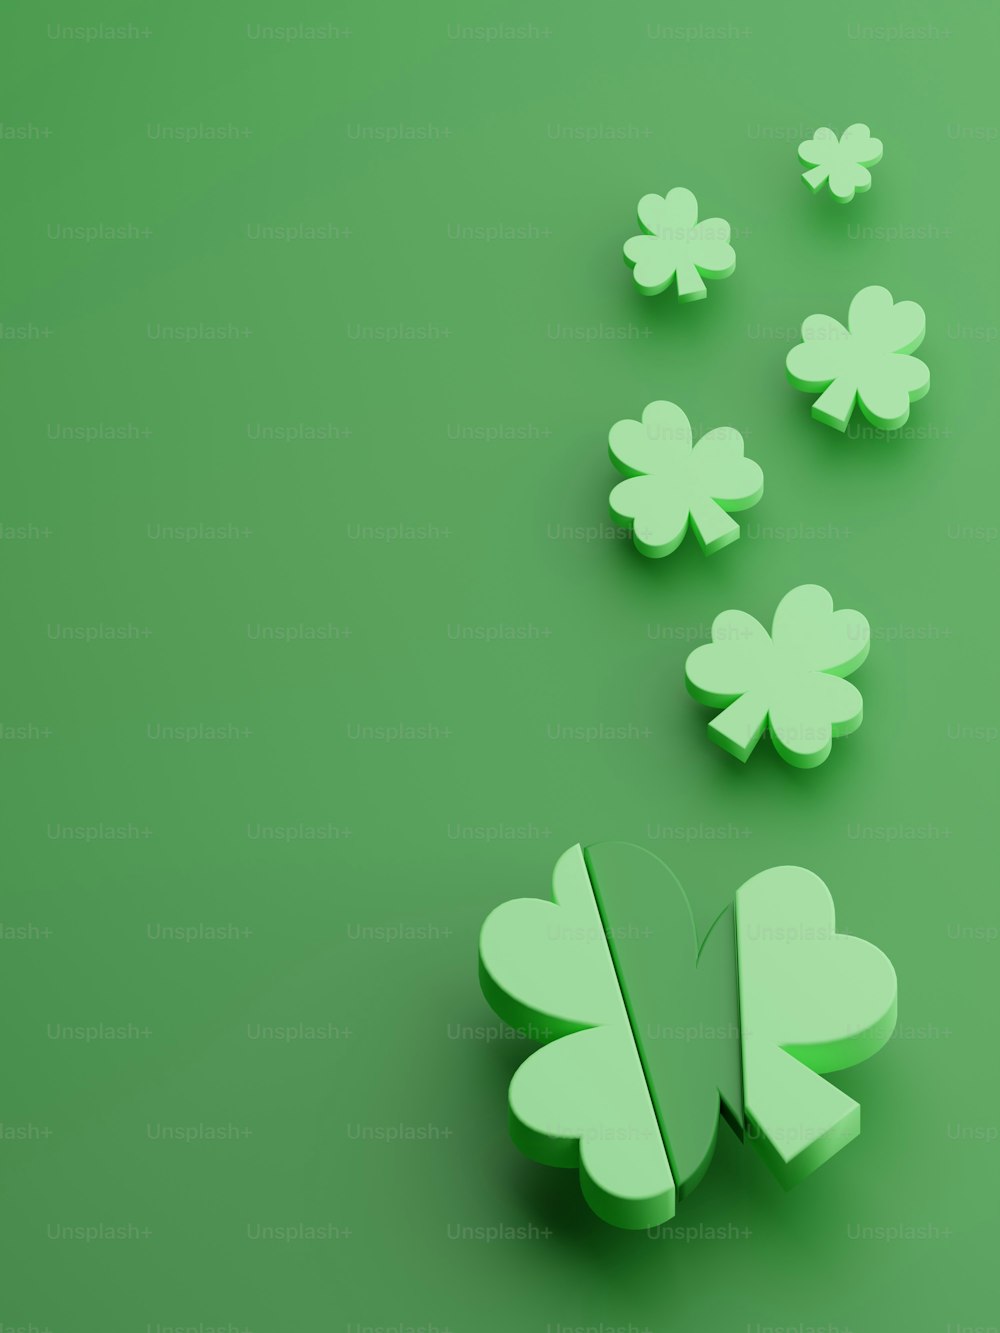 a group of green shamrocks on a green background